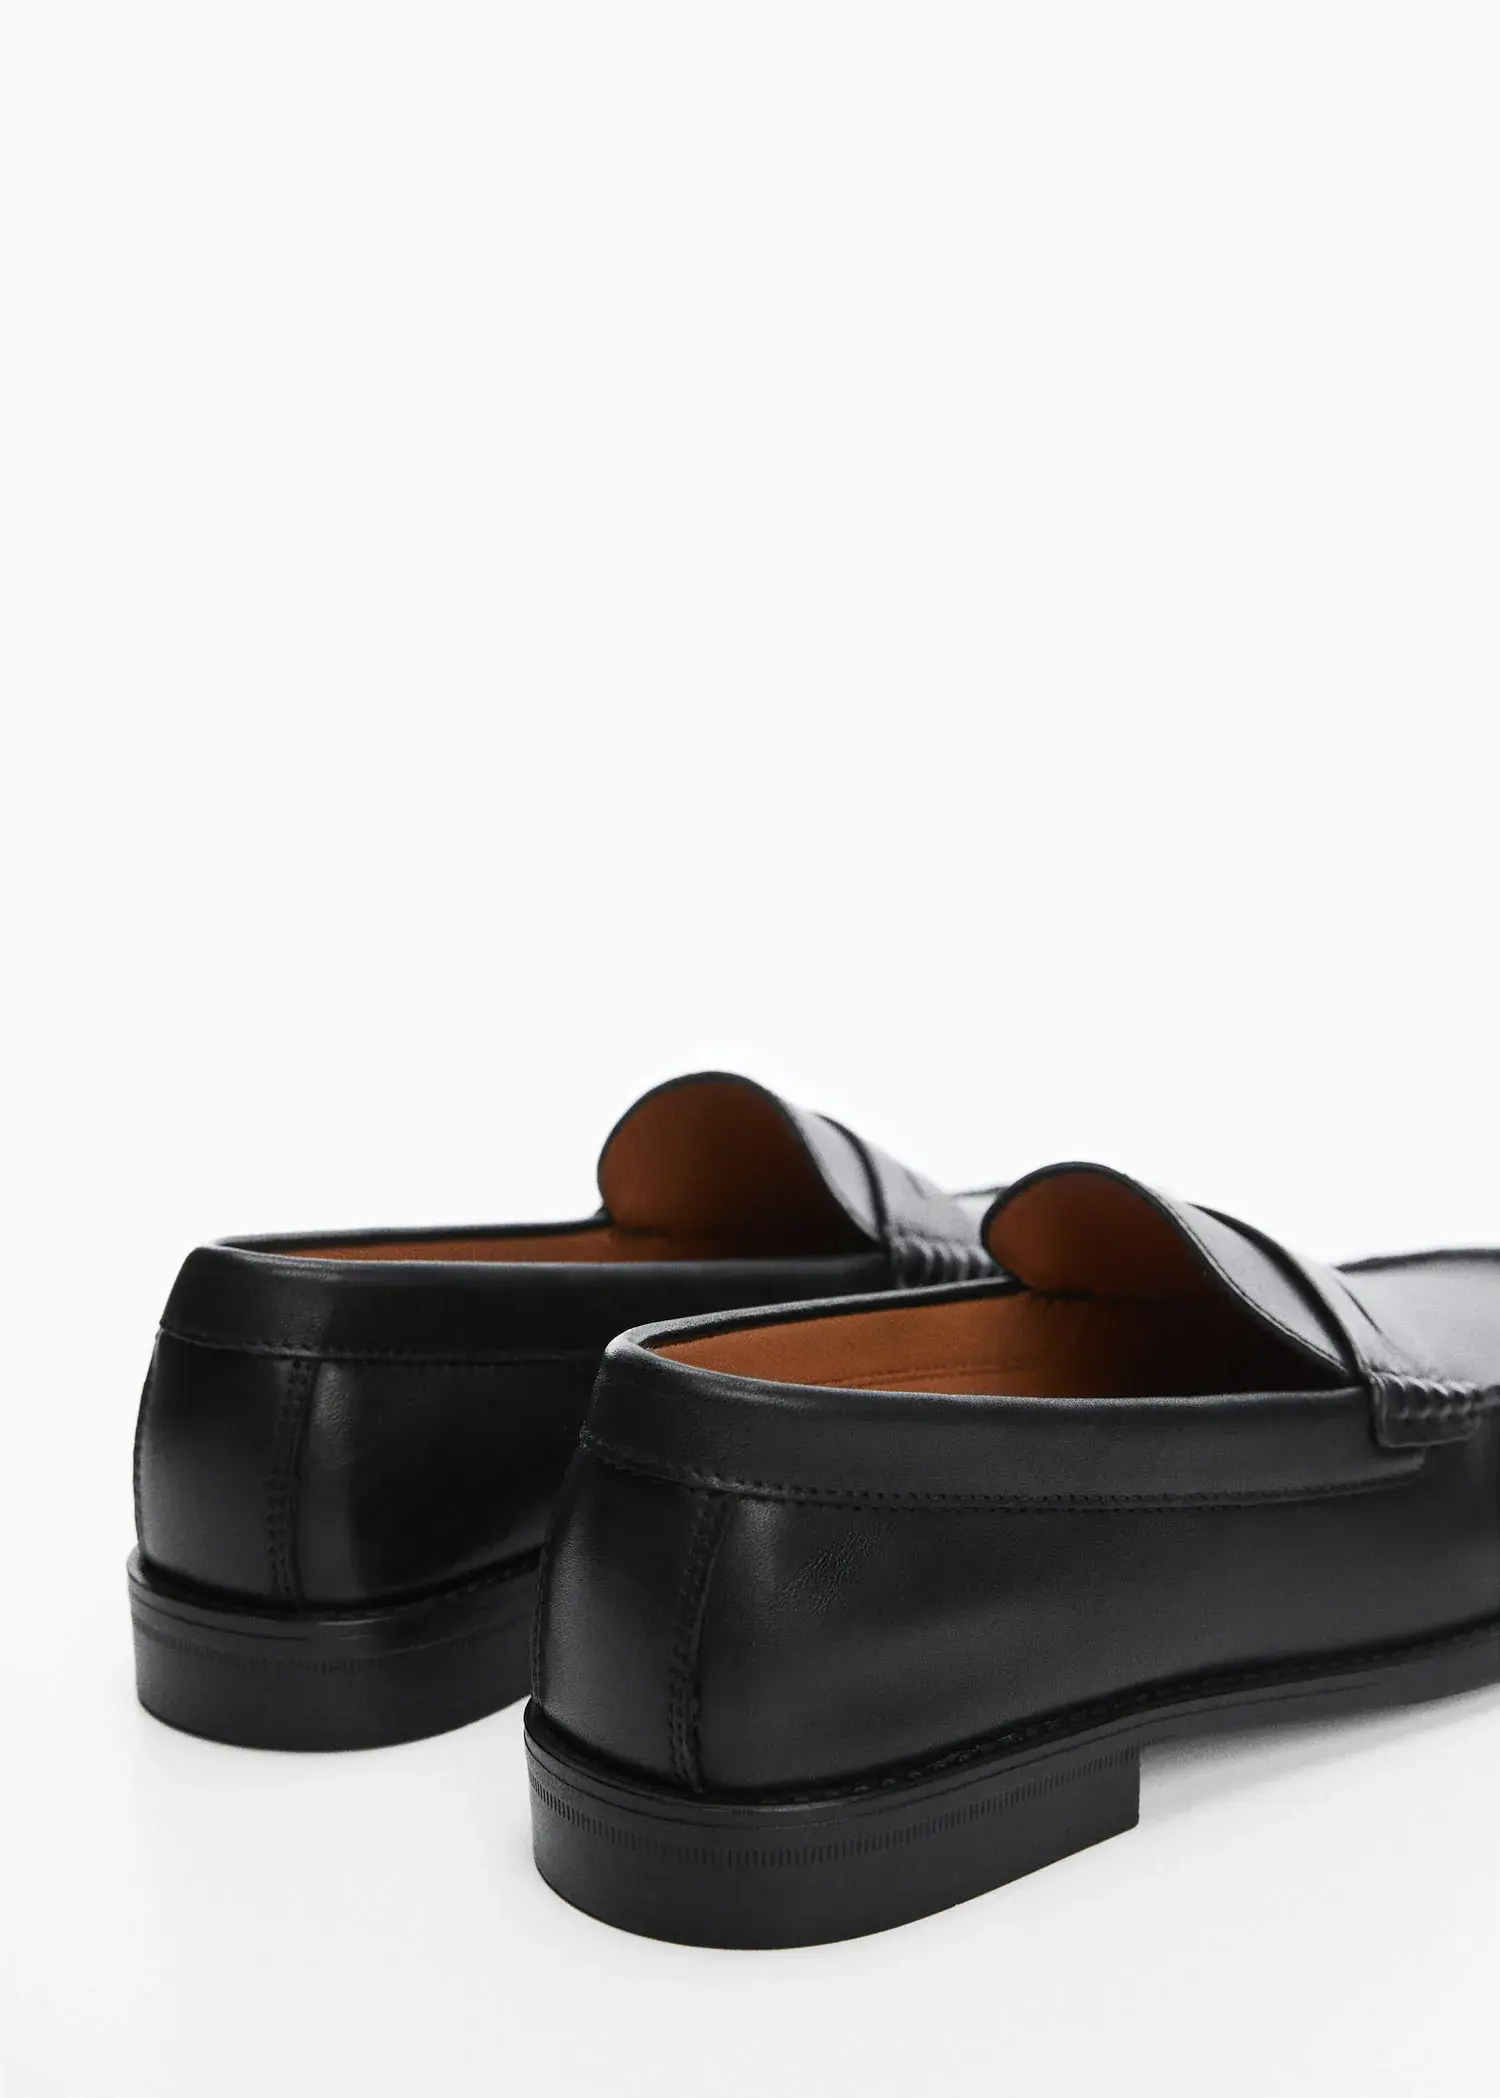 Mango Leather penny loafers. a close up of a pair of shoes on a white surface 